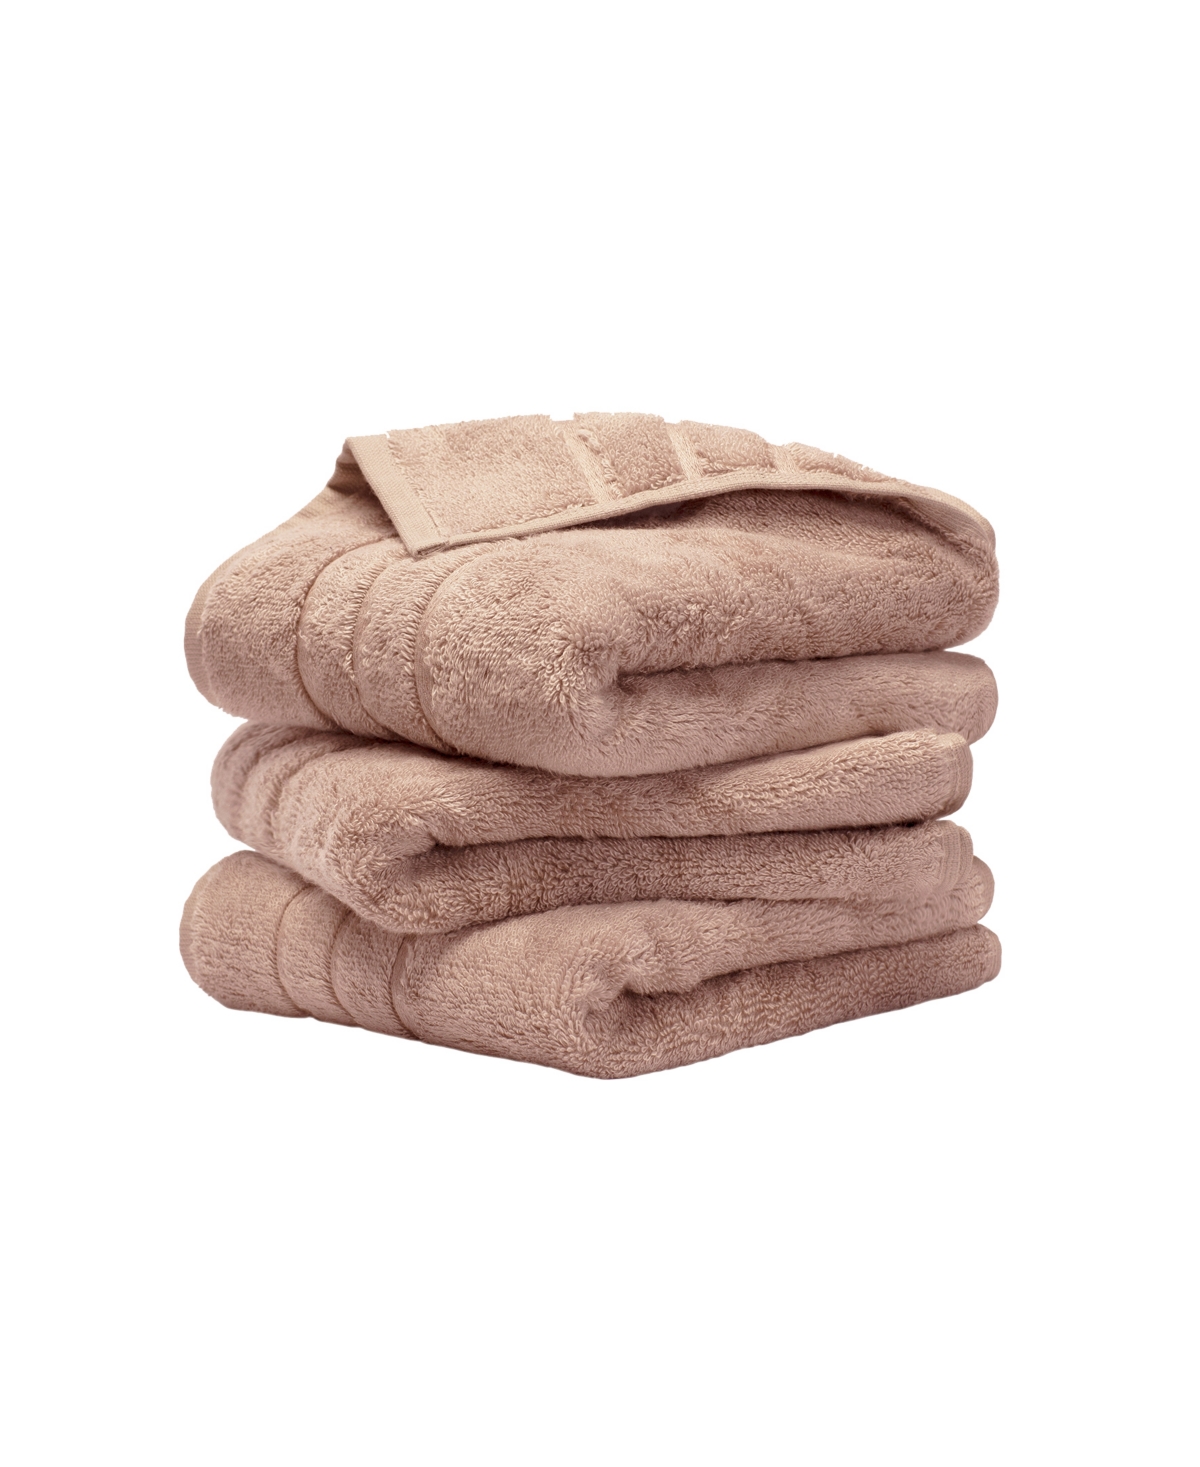 Cariloha 3-piece 30" X 16" Viscose From Bamboo Hand Towel Set Bedding In Tan/beige